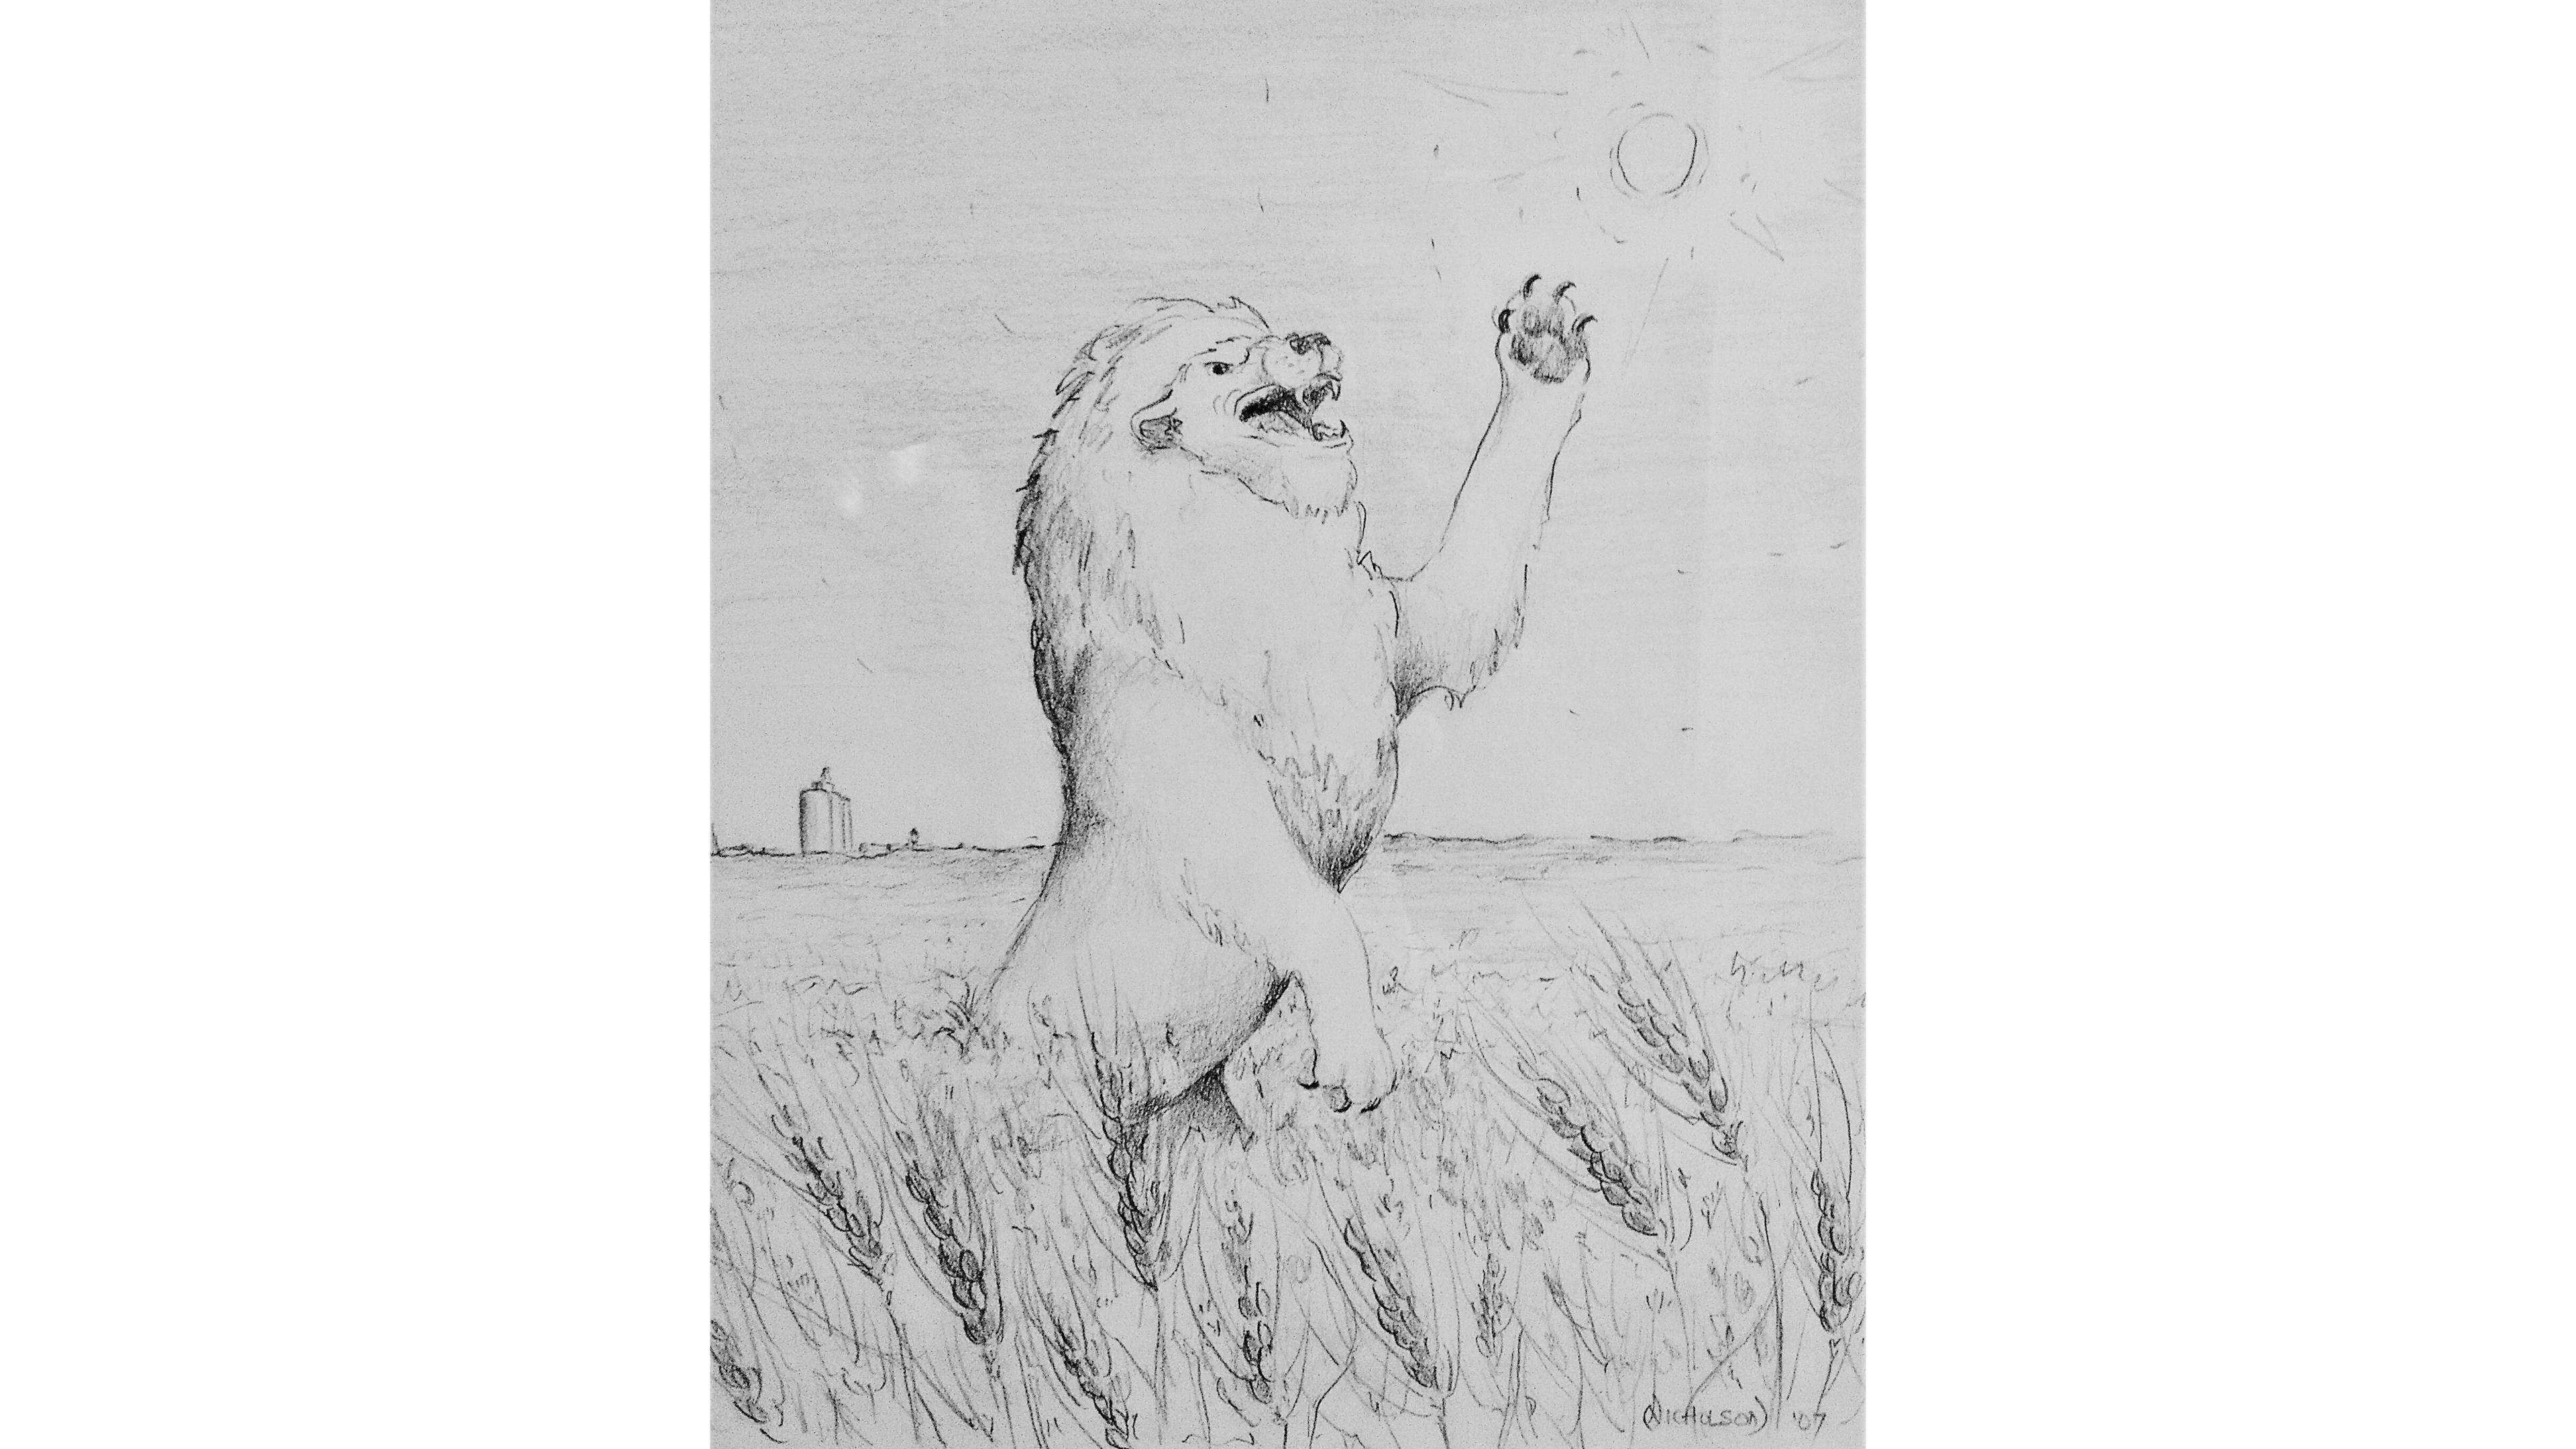 This sketch depicts a lion in the foreground of Kansas wheatfield, with a diminishing sun and tiny grain town far away in the distance.